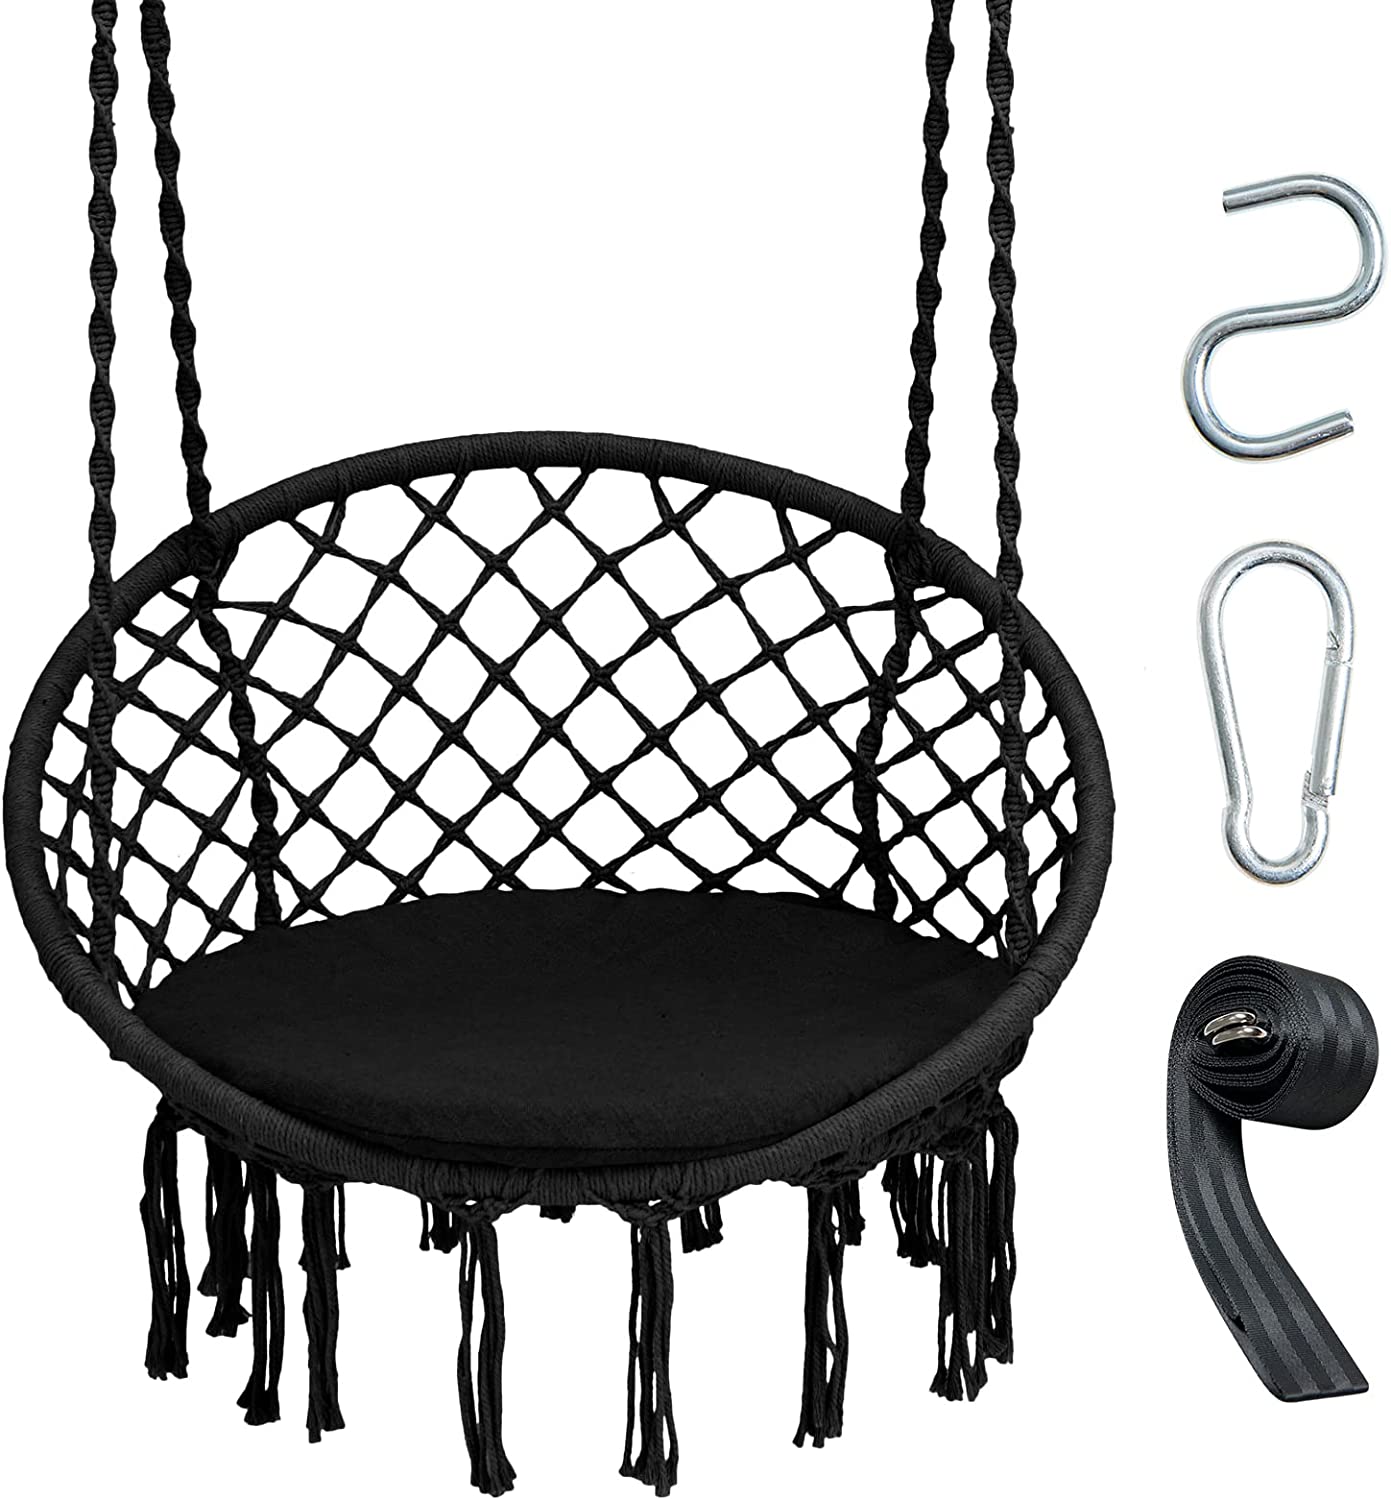 Giantex Hammock Chair Macrame Swing - Hanging Chair with Cushion and Hardware Kit, 330 LBS Weight Capacity